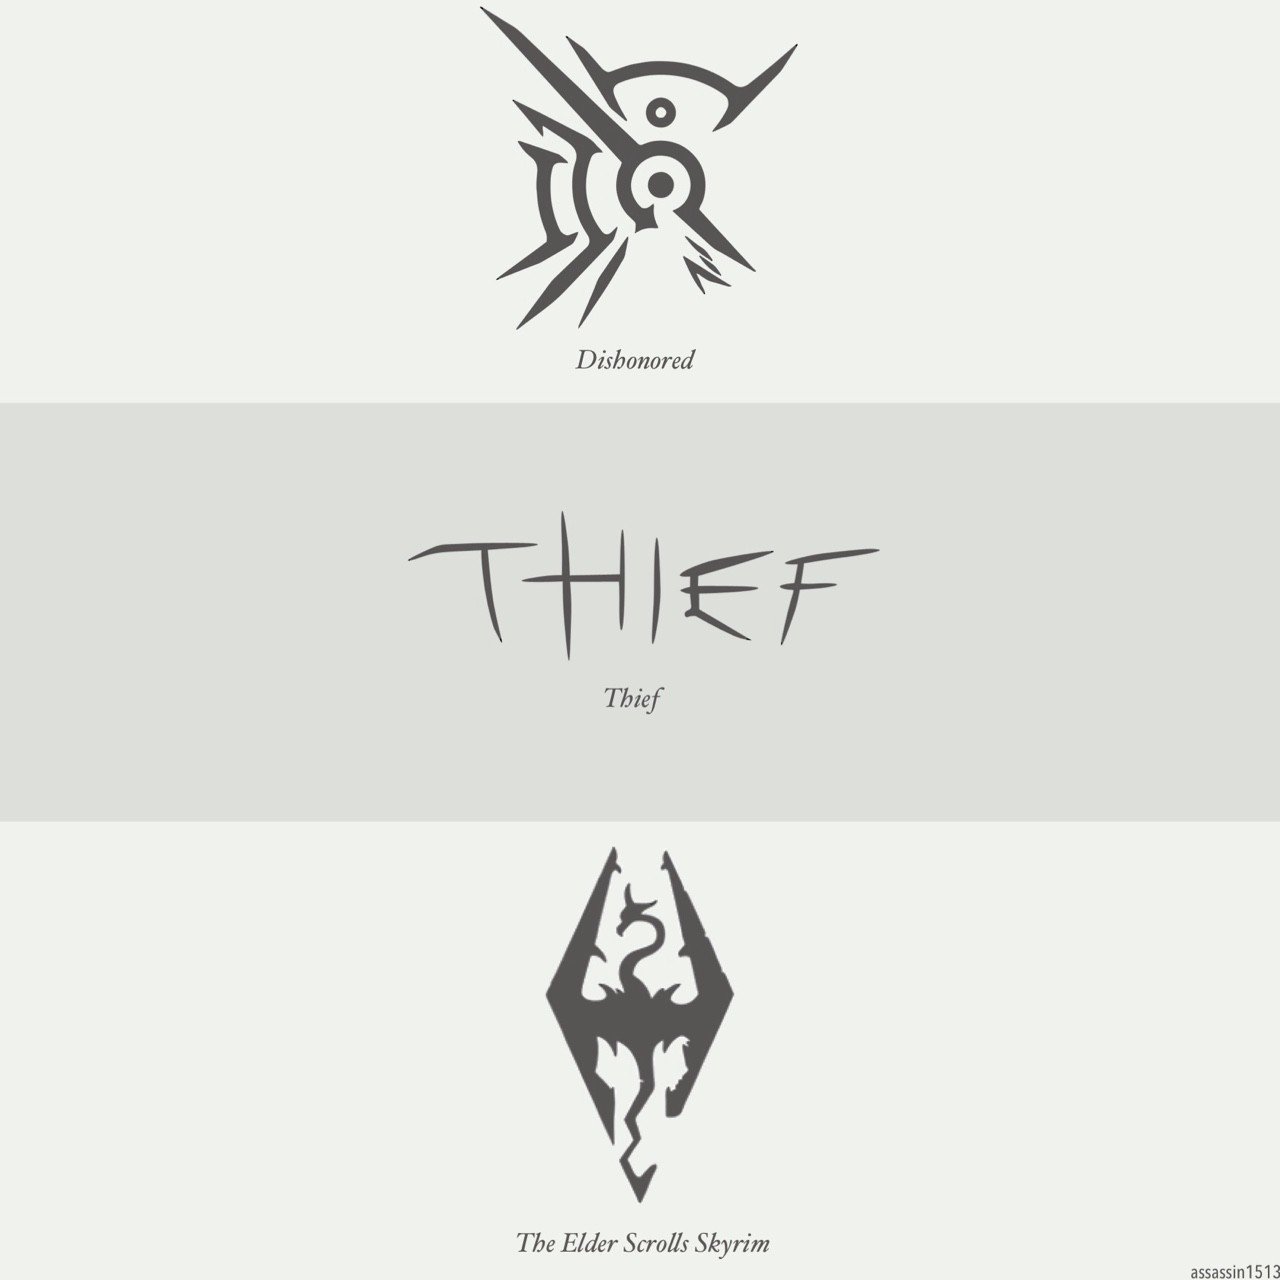 Watch the Photo by the5impleton with the username @the5impleton, who is a verified user, posted on December 14, 2017 and the text says 'assassin1513:

[Minimalistic Video Games Collection]
[Edits made by me :)] #assassins  #creed  #mirrors  #edge  #the  #witcher  #the  #elder  #scrolls  #skyrim  #deus  #ex  #half  #life  #zelda  #metal  #gear  #solid  #bioshock  #grand  #theft  #auto..'